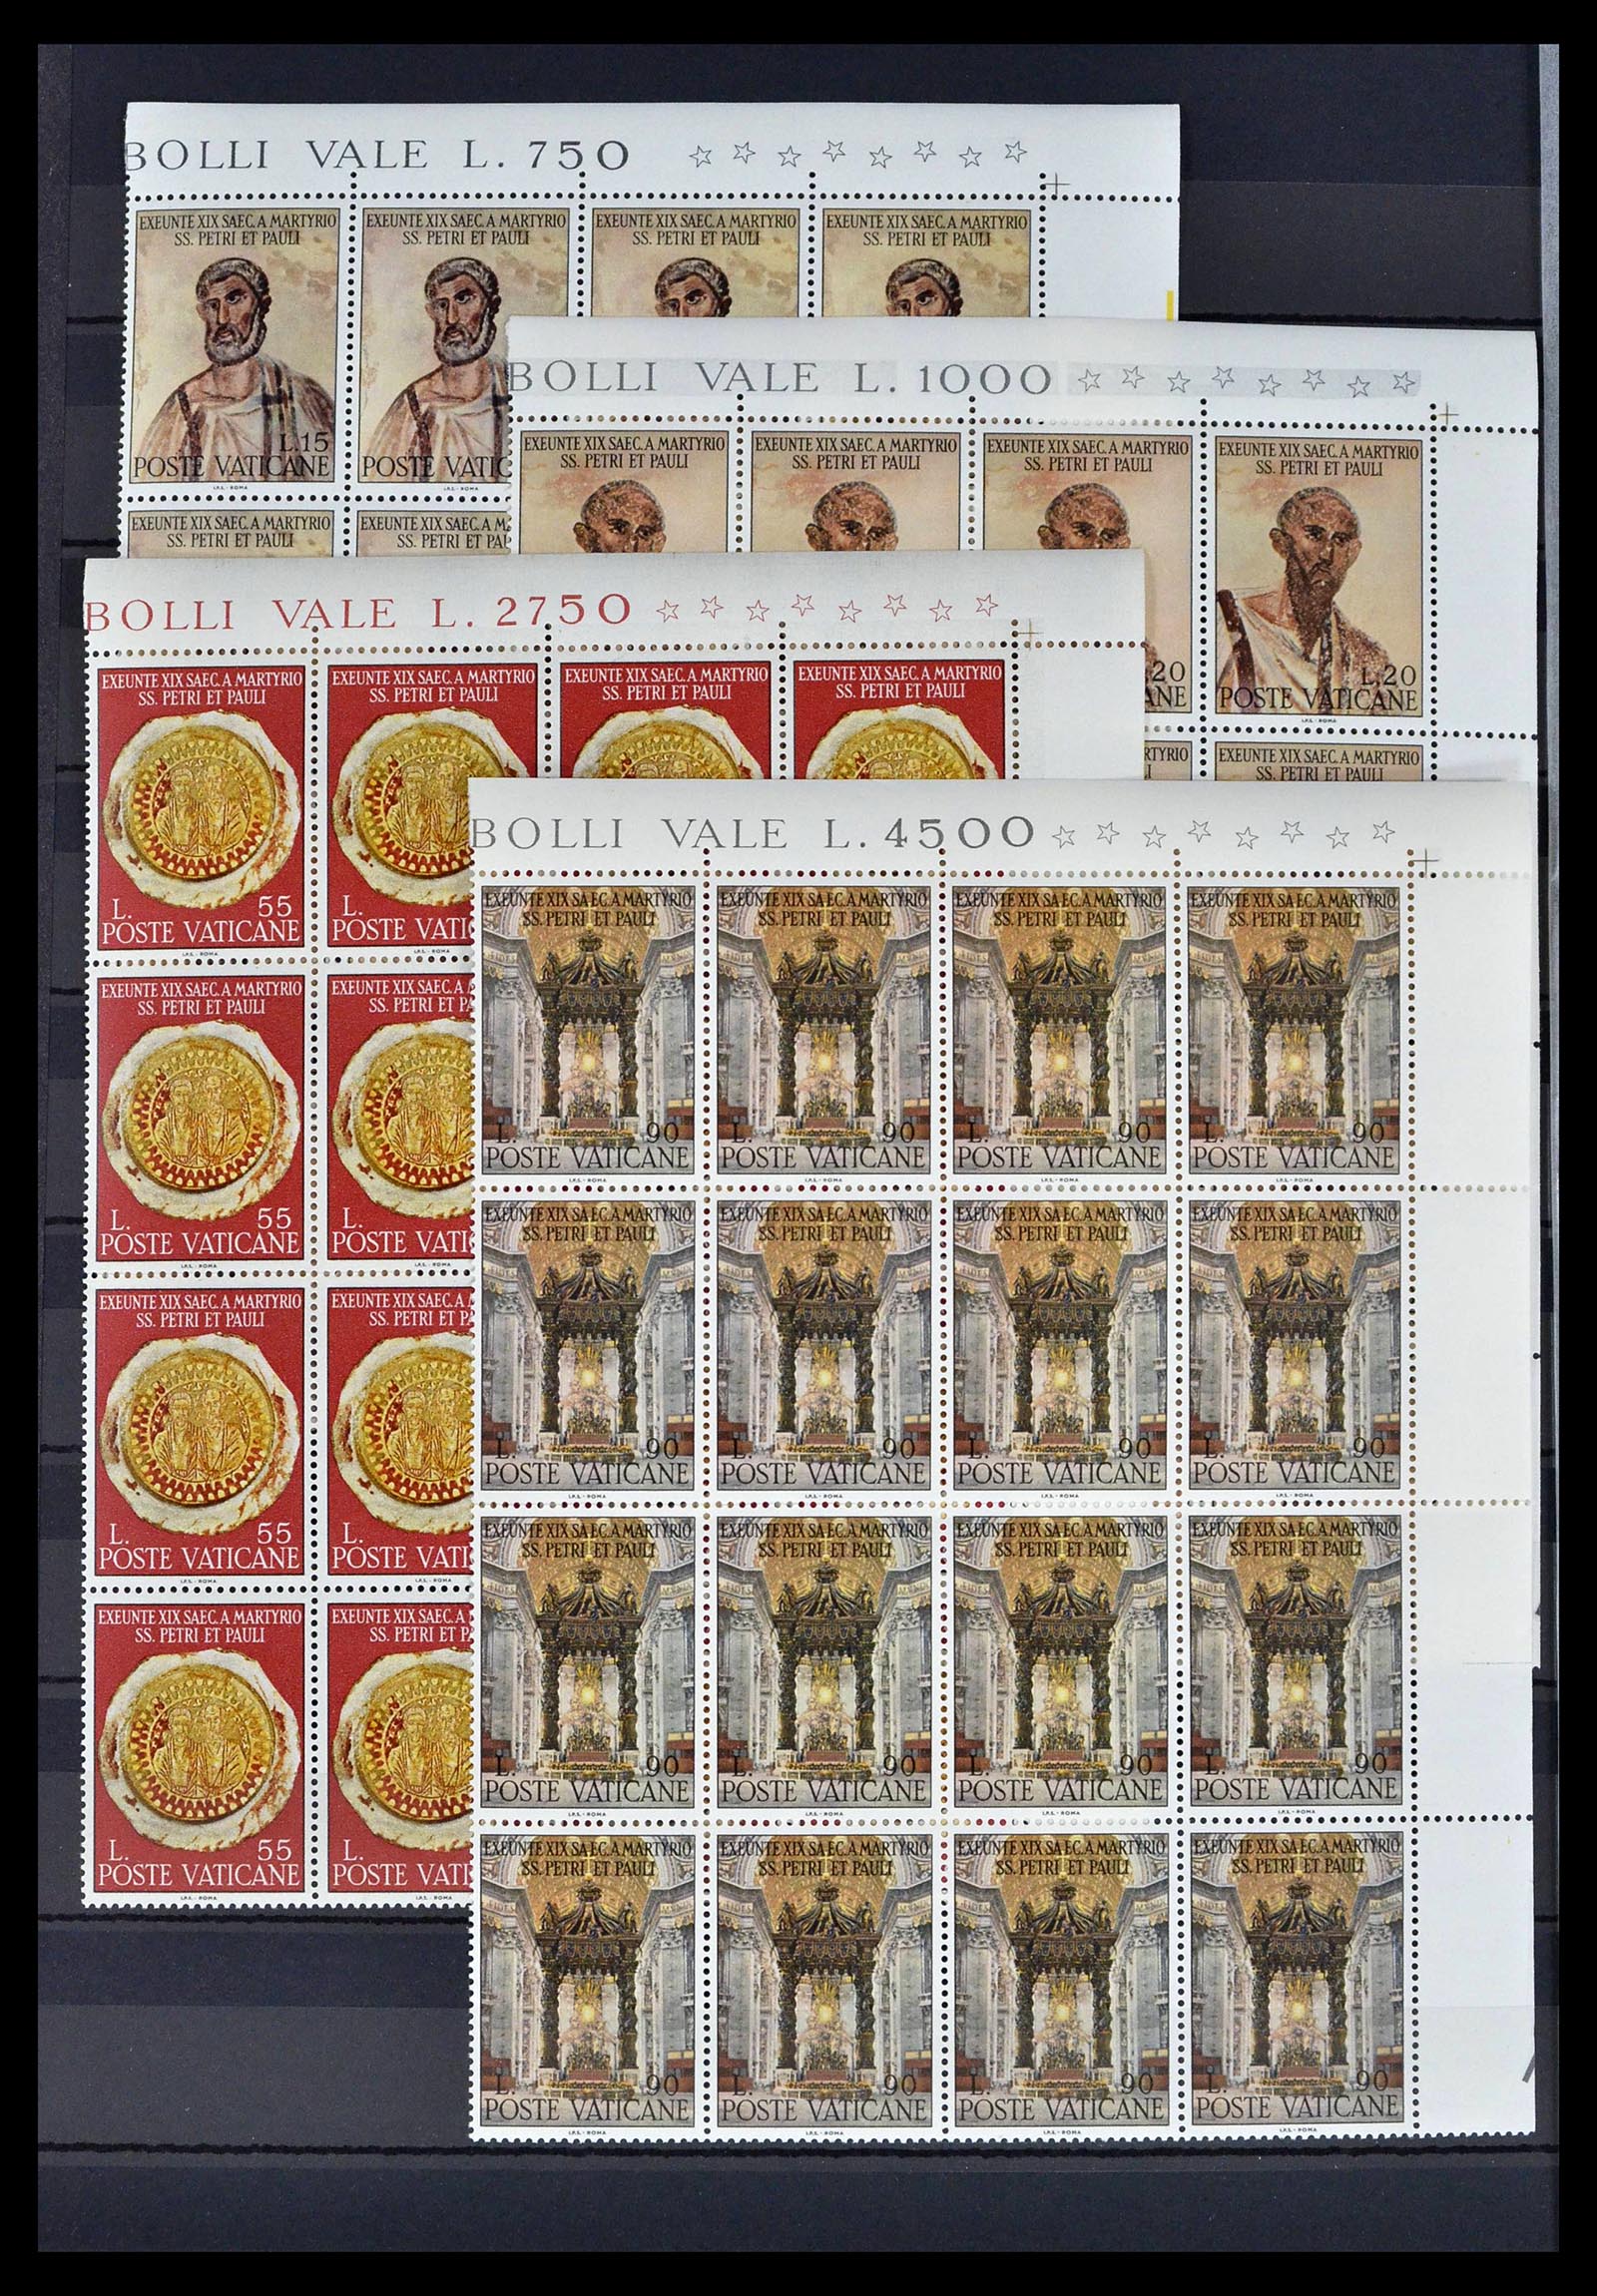 39236 0022 - Stamp collection 39236 European countries 40s-60s.